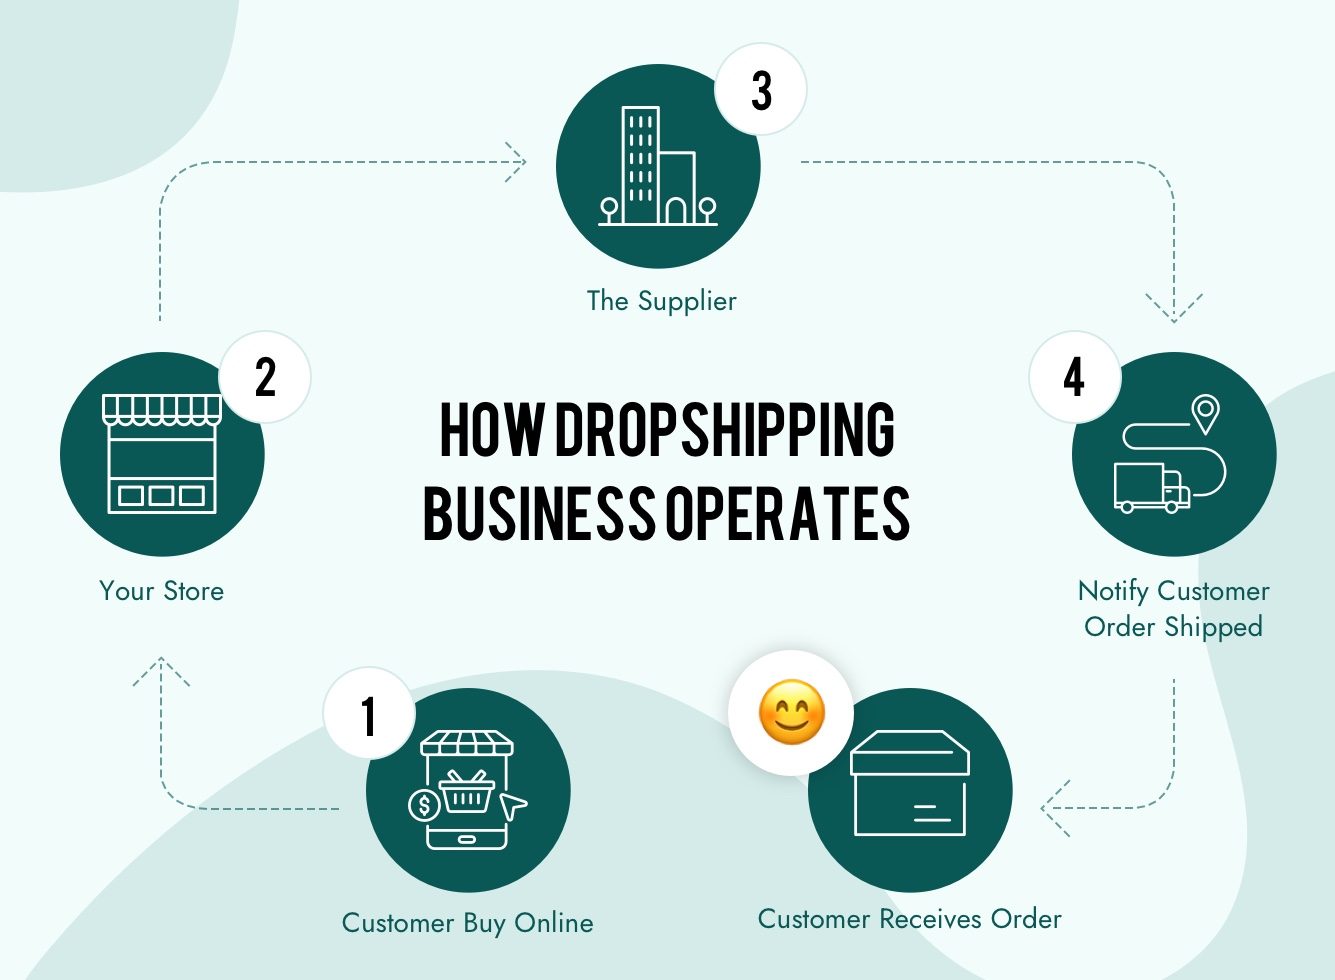 Shopify Dropshipping Guide - How to Dropship on Shopify